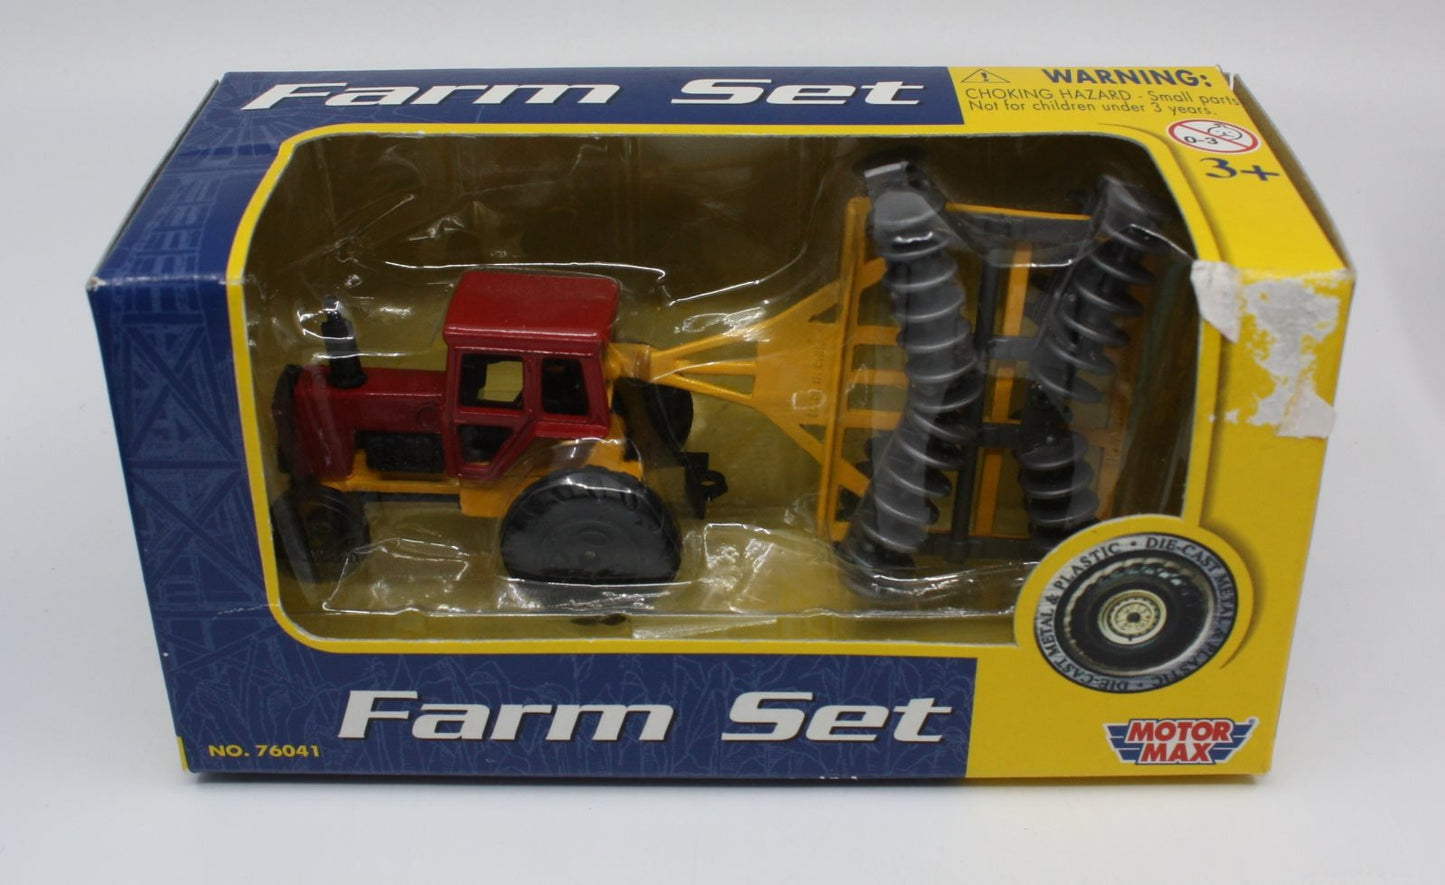 Motor Max 76041 HO Die Cast Red Tractor with Yellow Tiler